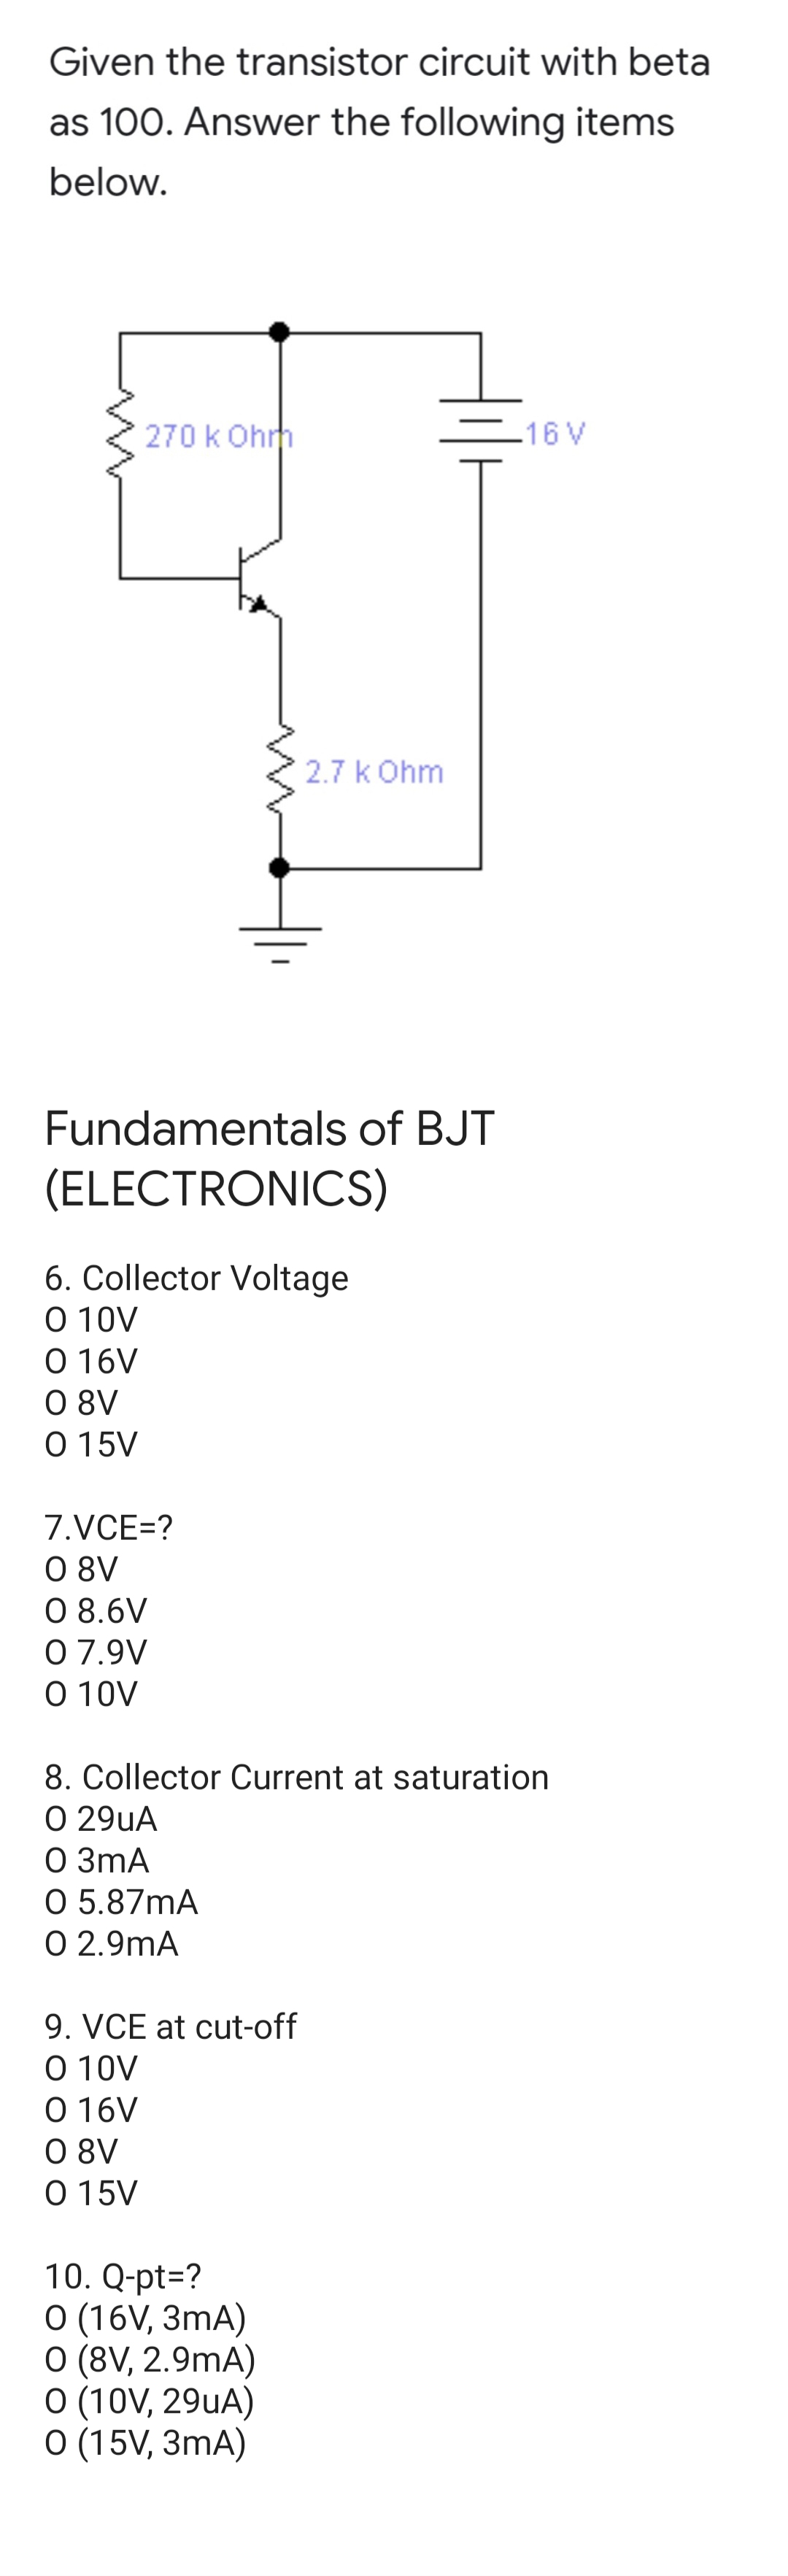 Given the transistor circuit with beta
as 100. Answer the following items
below.
270 k Ohrh
-16 V
2.7 k Ohm
Fundamentals of BJT
(ELECTRONICS)
6. Collector Voltage
O 10V
O 16V
O 8V
O 15V
7.VCE=?
O 8V
O 8.6V
0 7.9V
O 10V
8. Collector Current at saturation
O 29uA
O 3mA
O 5.87mA
O 2.9mA
9. VCE at cut-off
O 10V
O 16V
O 8V
O 15V
10. Q-pt=?
O (16V, 3mA)
O (8V, 2.9mA)
O (10V, 29uA)
O (15V, 3mA)
